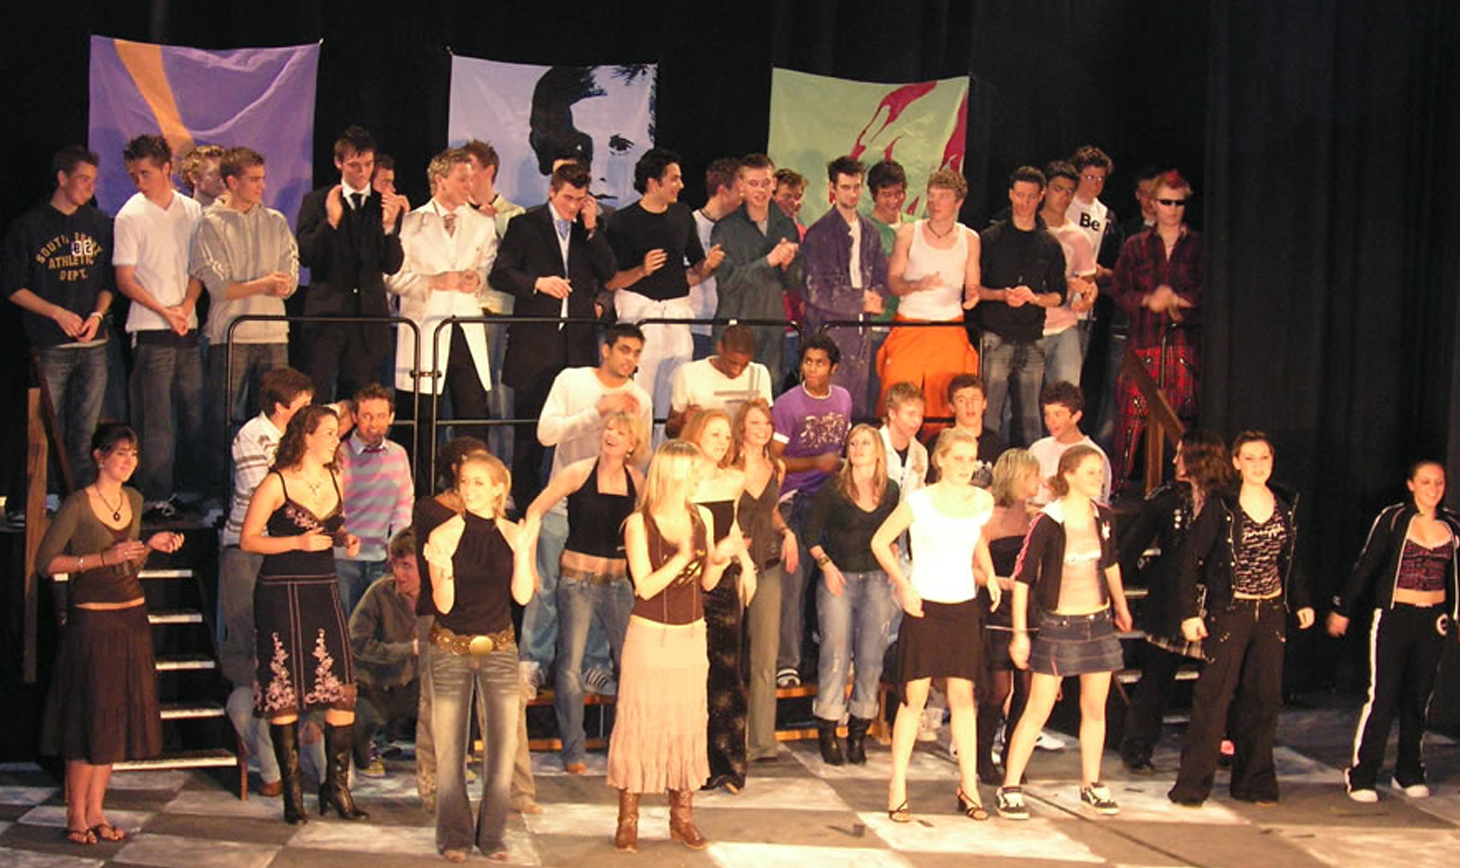 RGS Fashion show 2005 - watch out Vivienne Westwood!